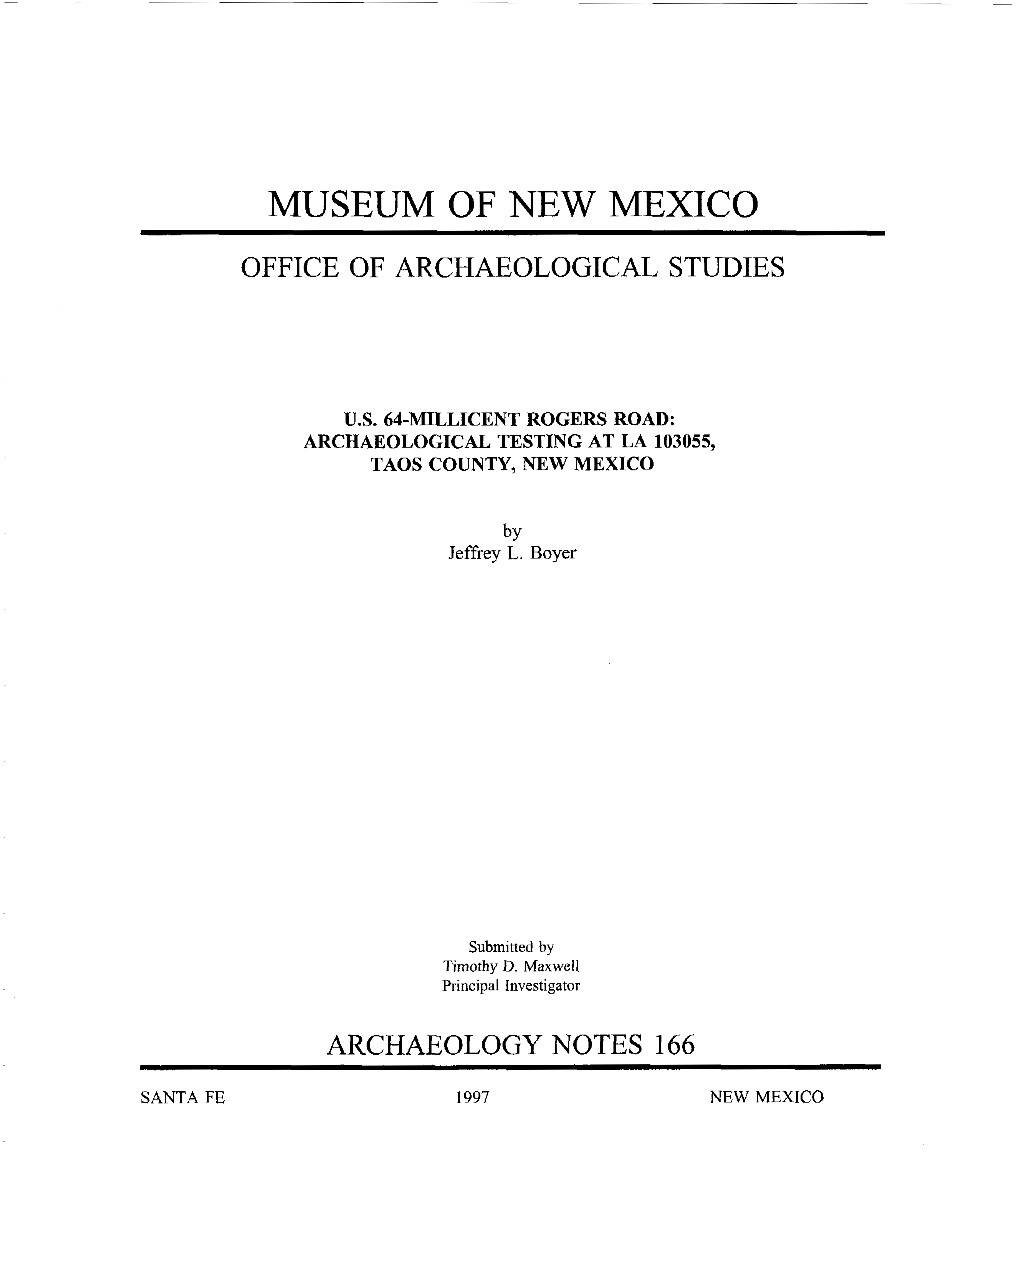 Museum of New Mexico Office of Archaeological Studies